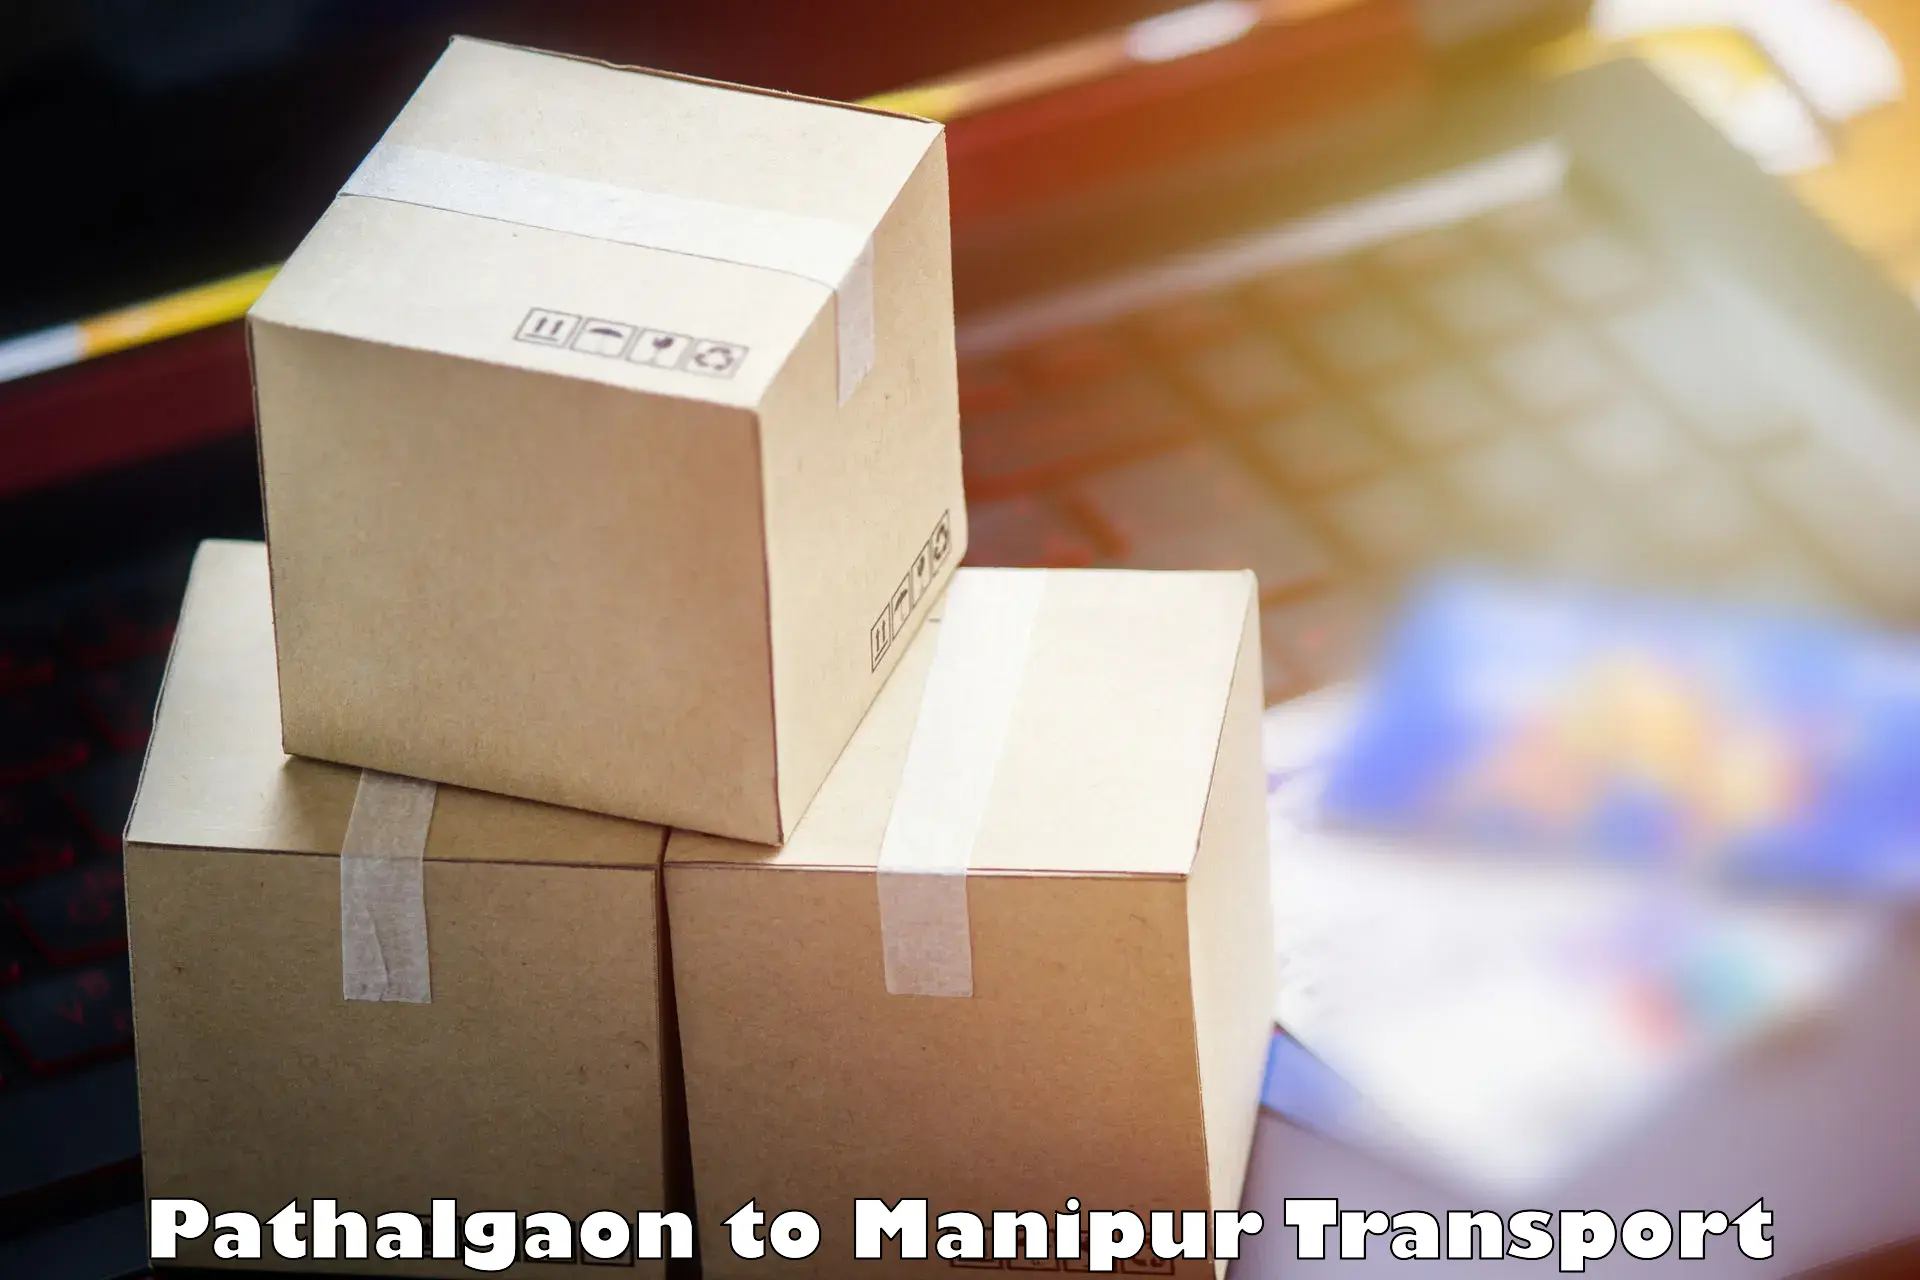 Container transport service Pathalgaon to Manipur